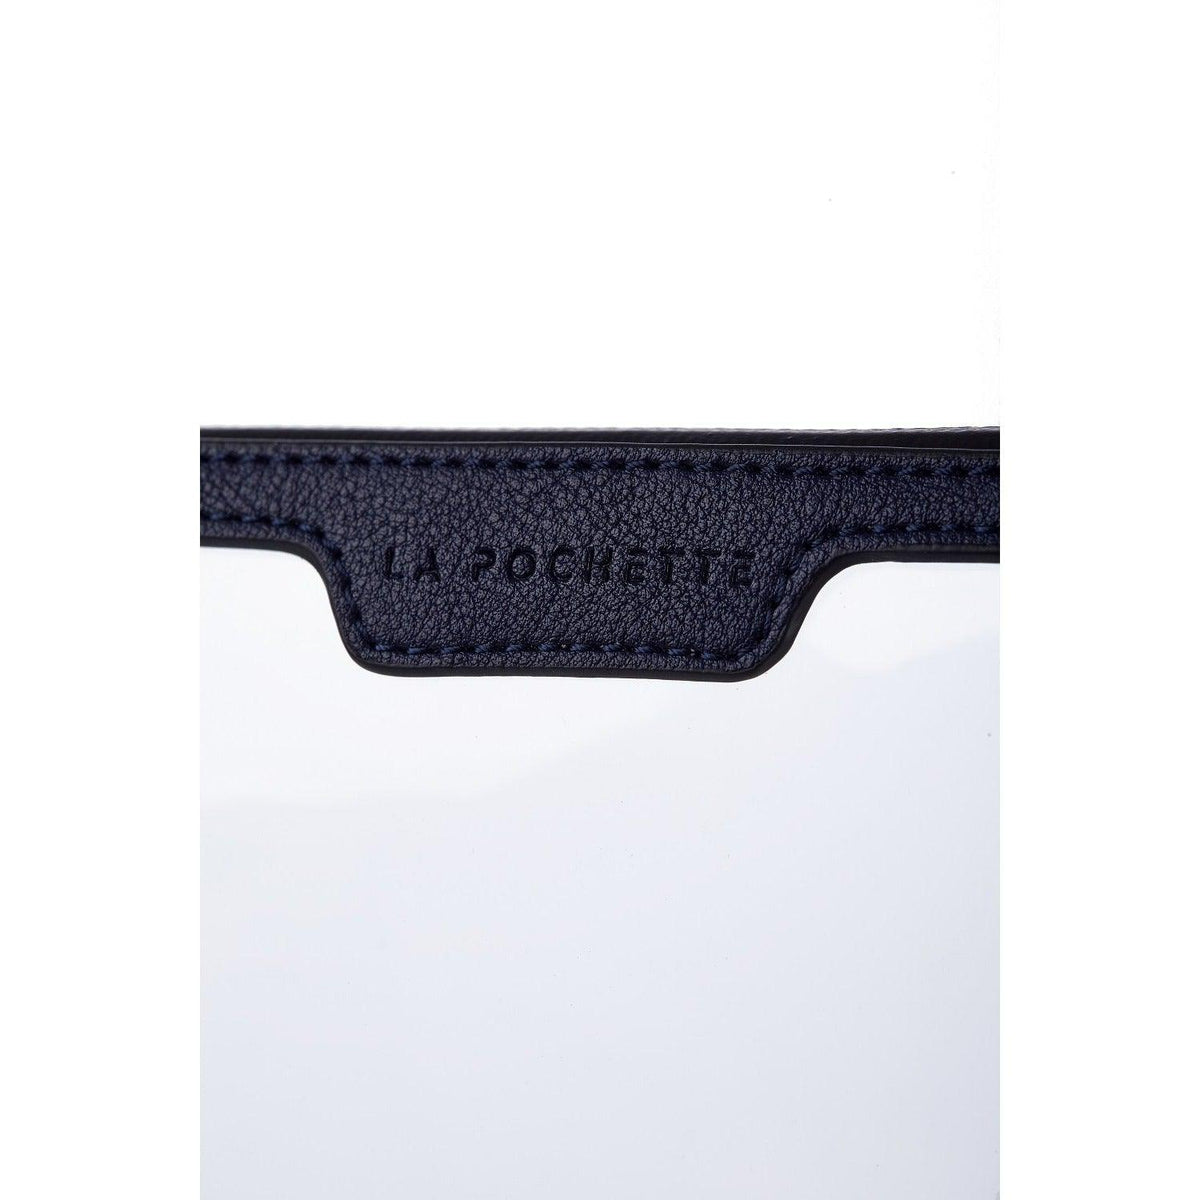 Large Anywhere Everywhere Pouch in Midnight Ink colourway, showing Logo detail